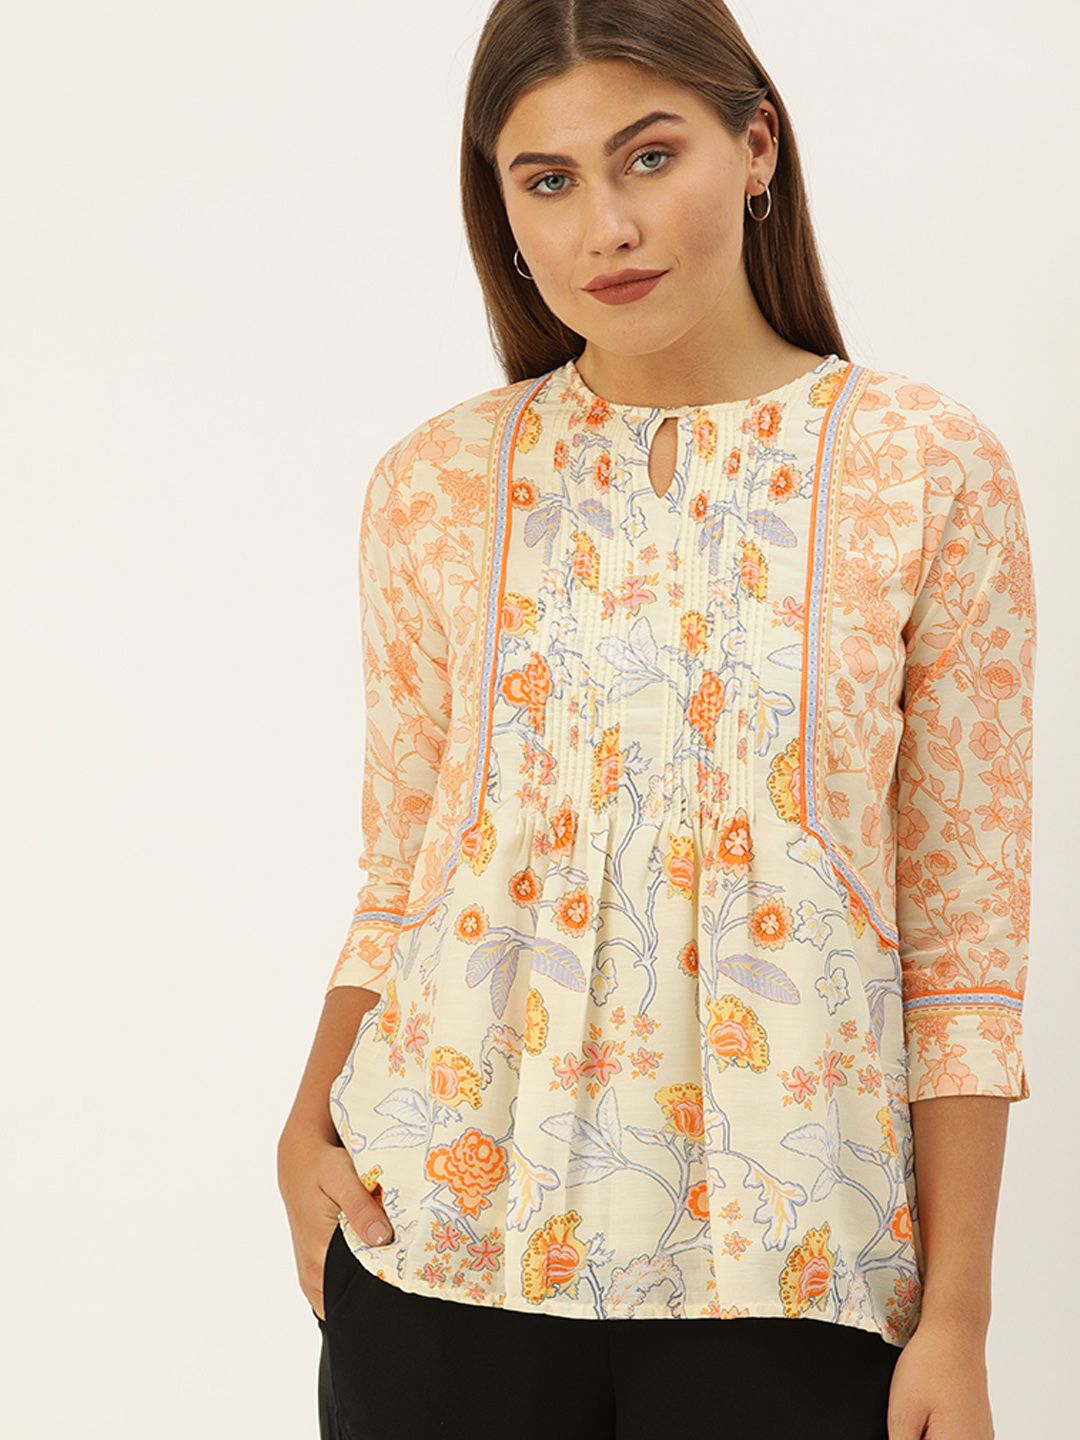 AND Off White & Orange Floral Printed Keyhole Neck Blouson Top Price in India